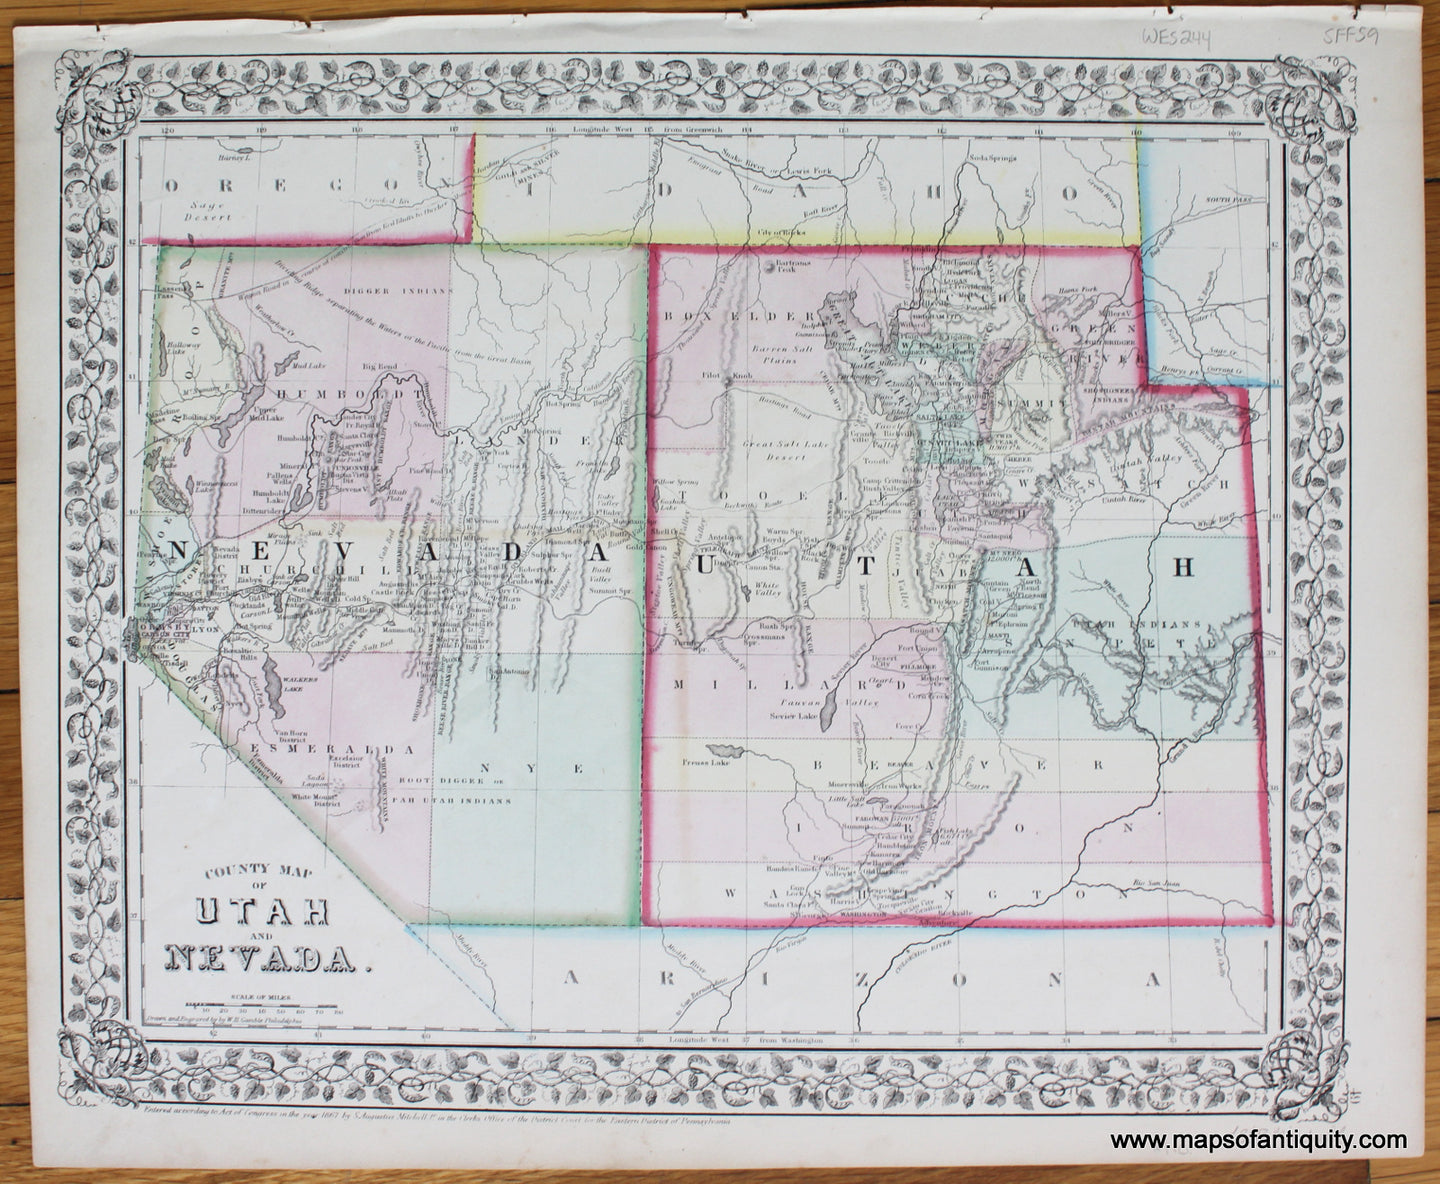 Antique-Hand-Colored-Map-County-Map-of-Utah-and-Nevada-United-States-West-1868-Mitchell-Maps-Of-Antiquity